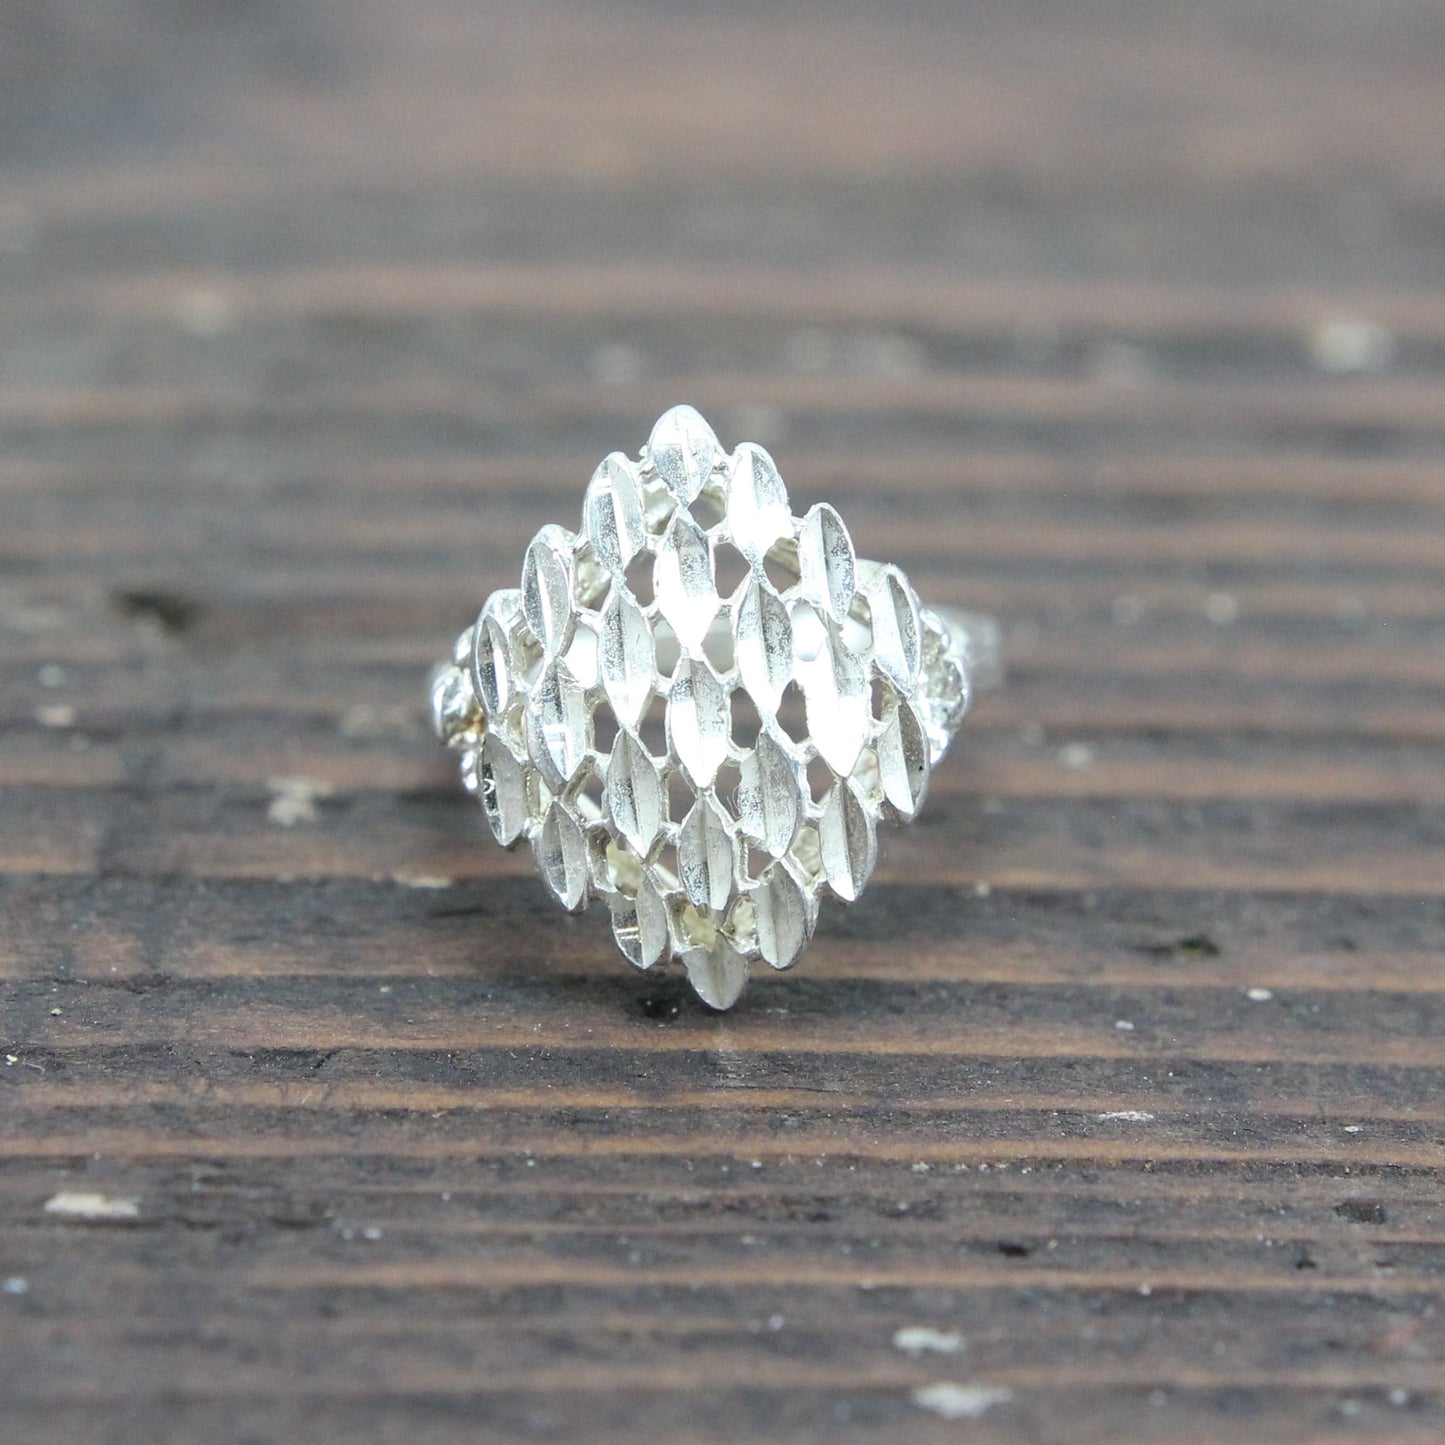 Sterling Silver Ring with Geometric Lattice Design - Size 6